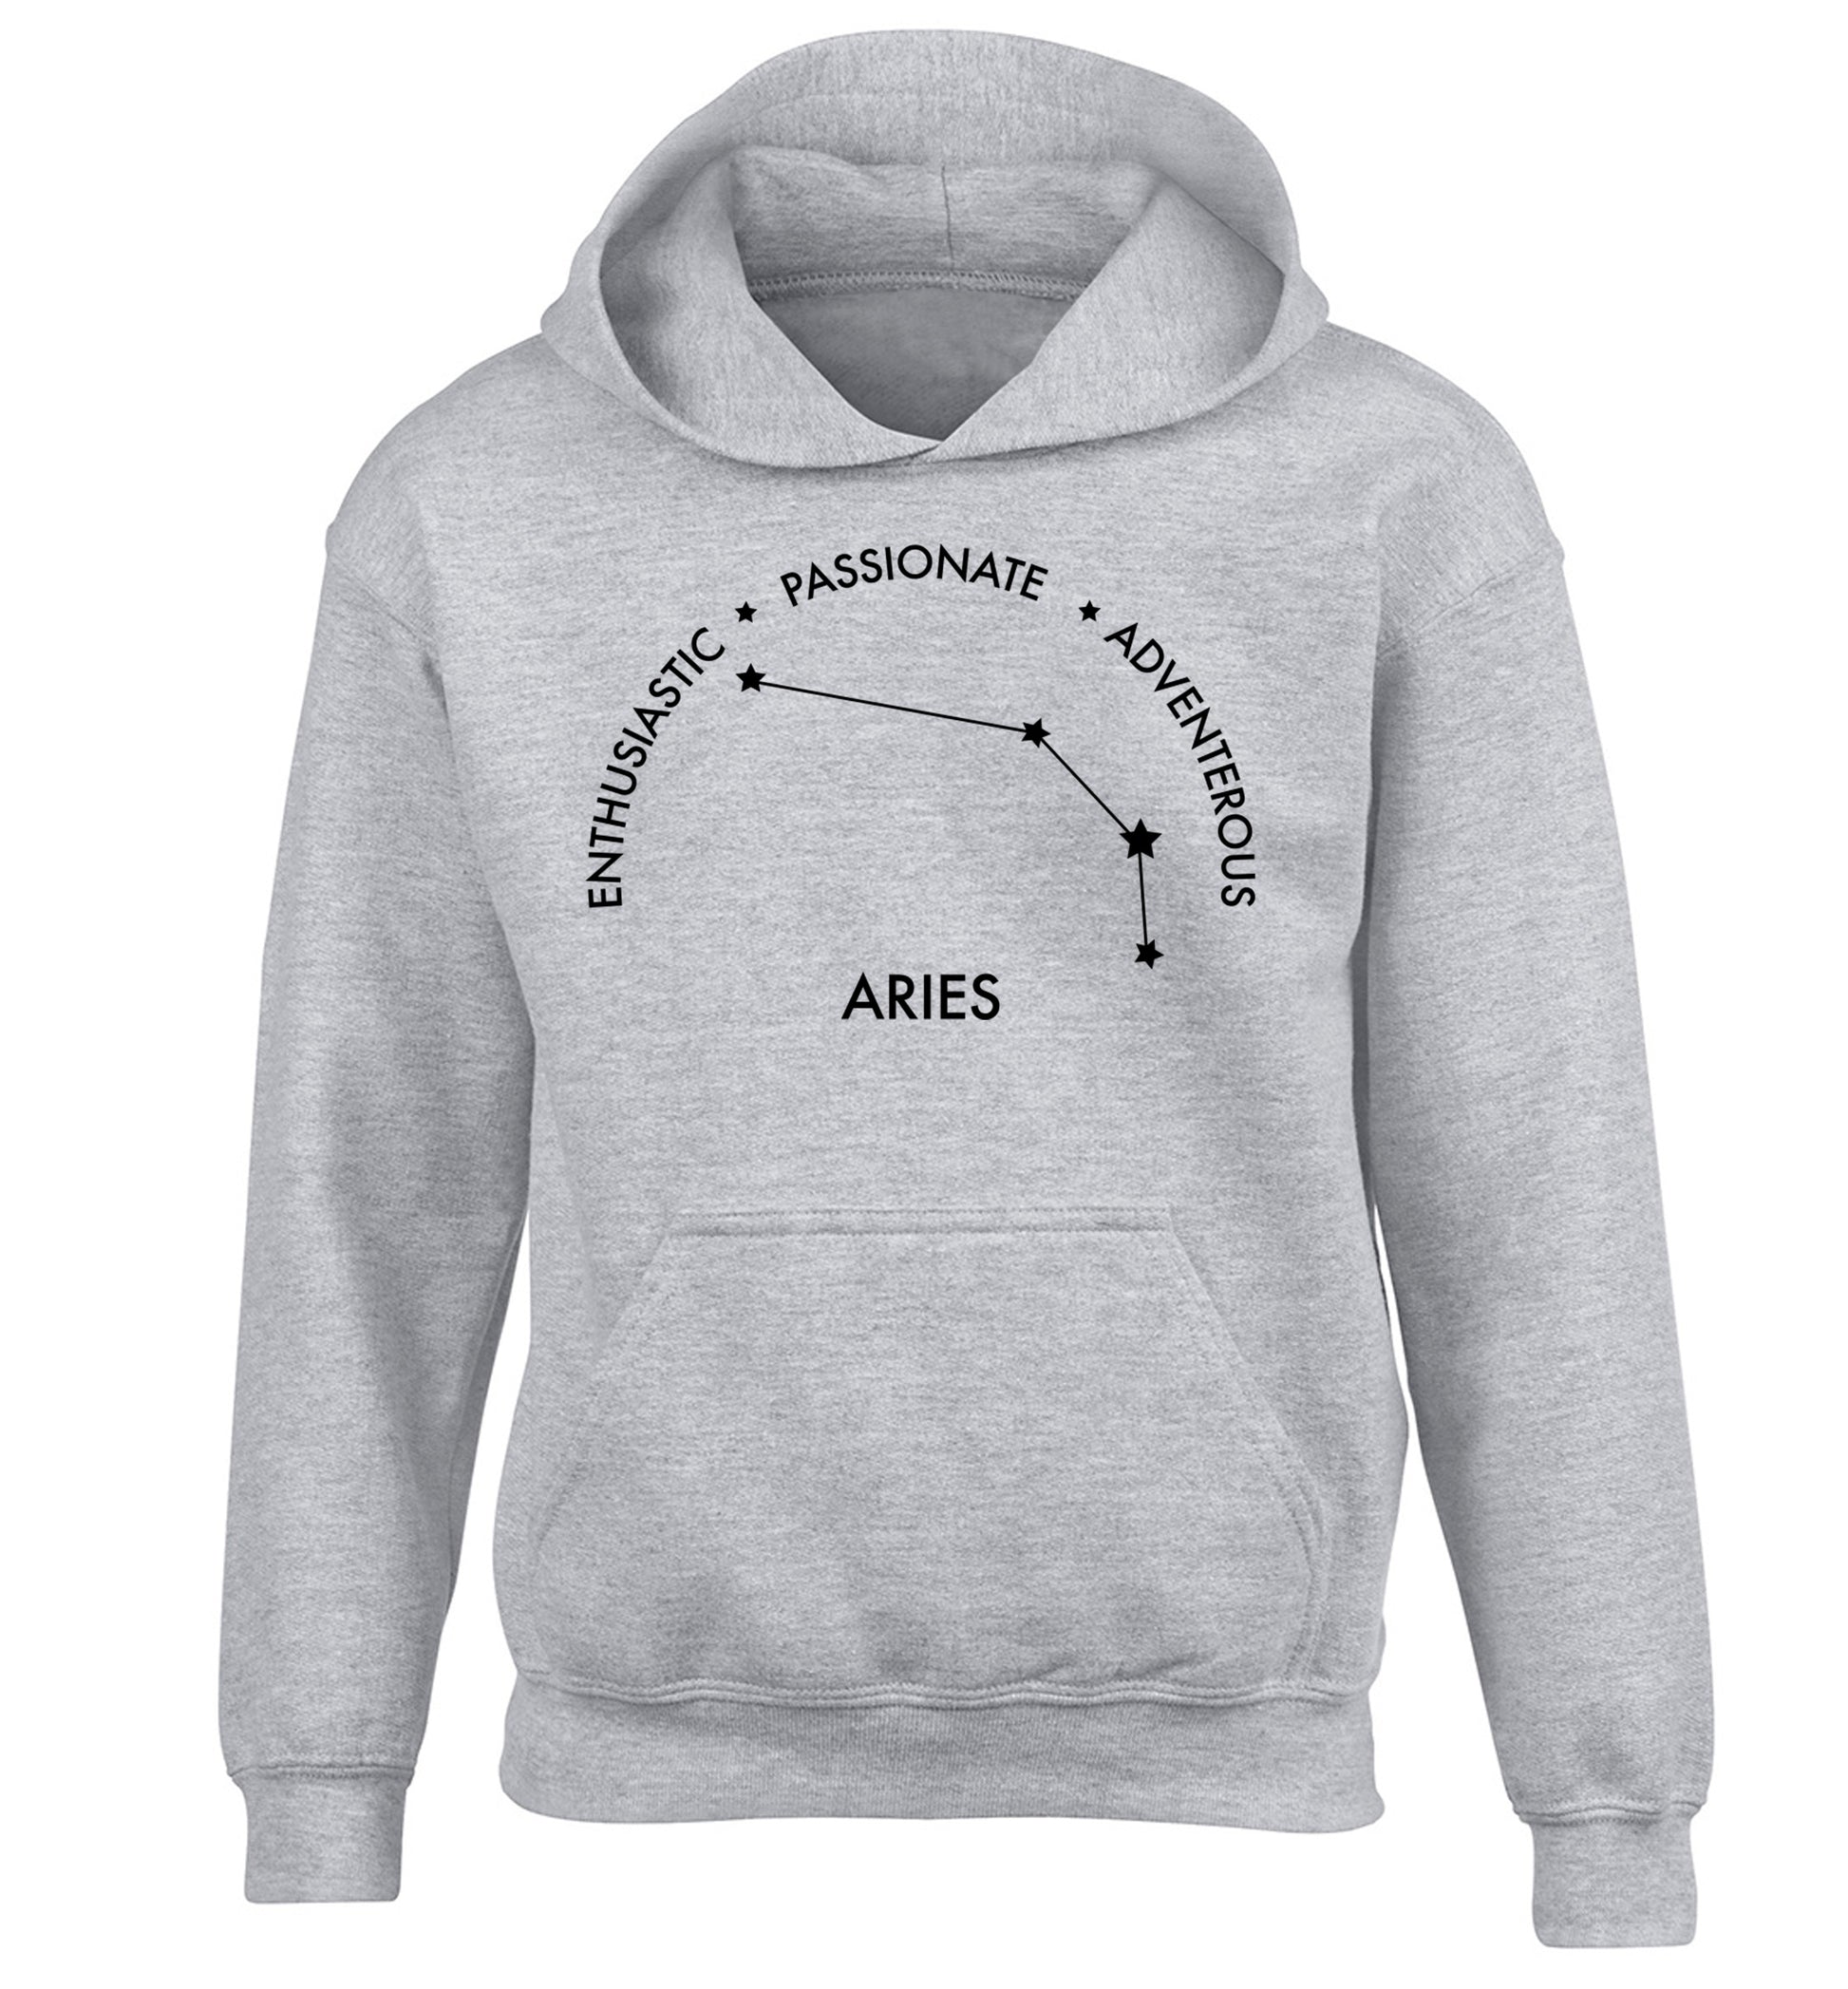 Aries enthusiastic | passionate | adventerous children's grey hoodie 12-13 Years